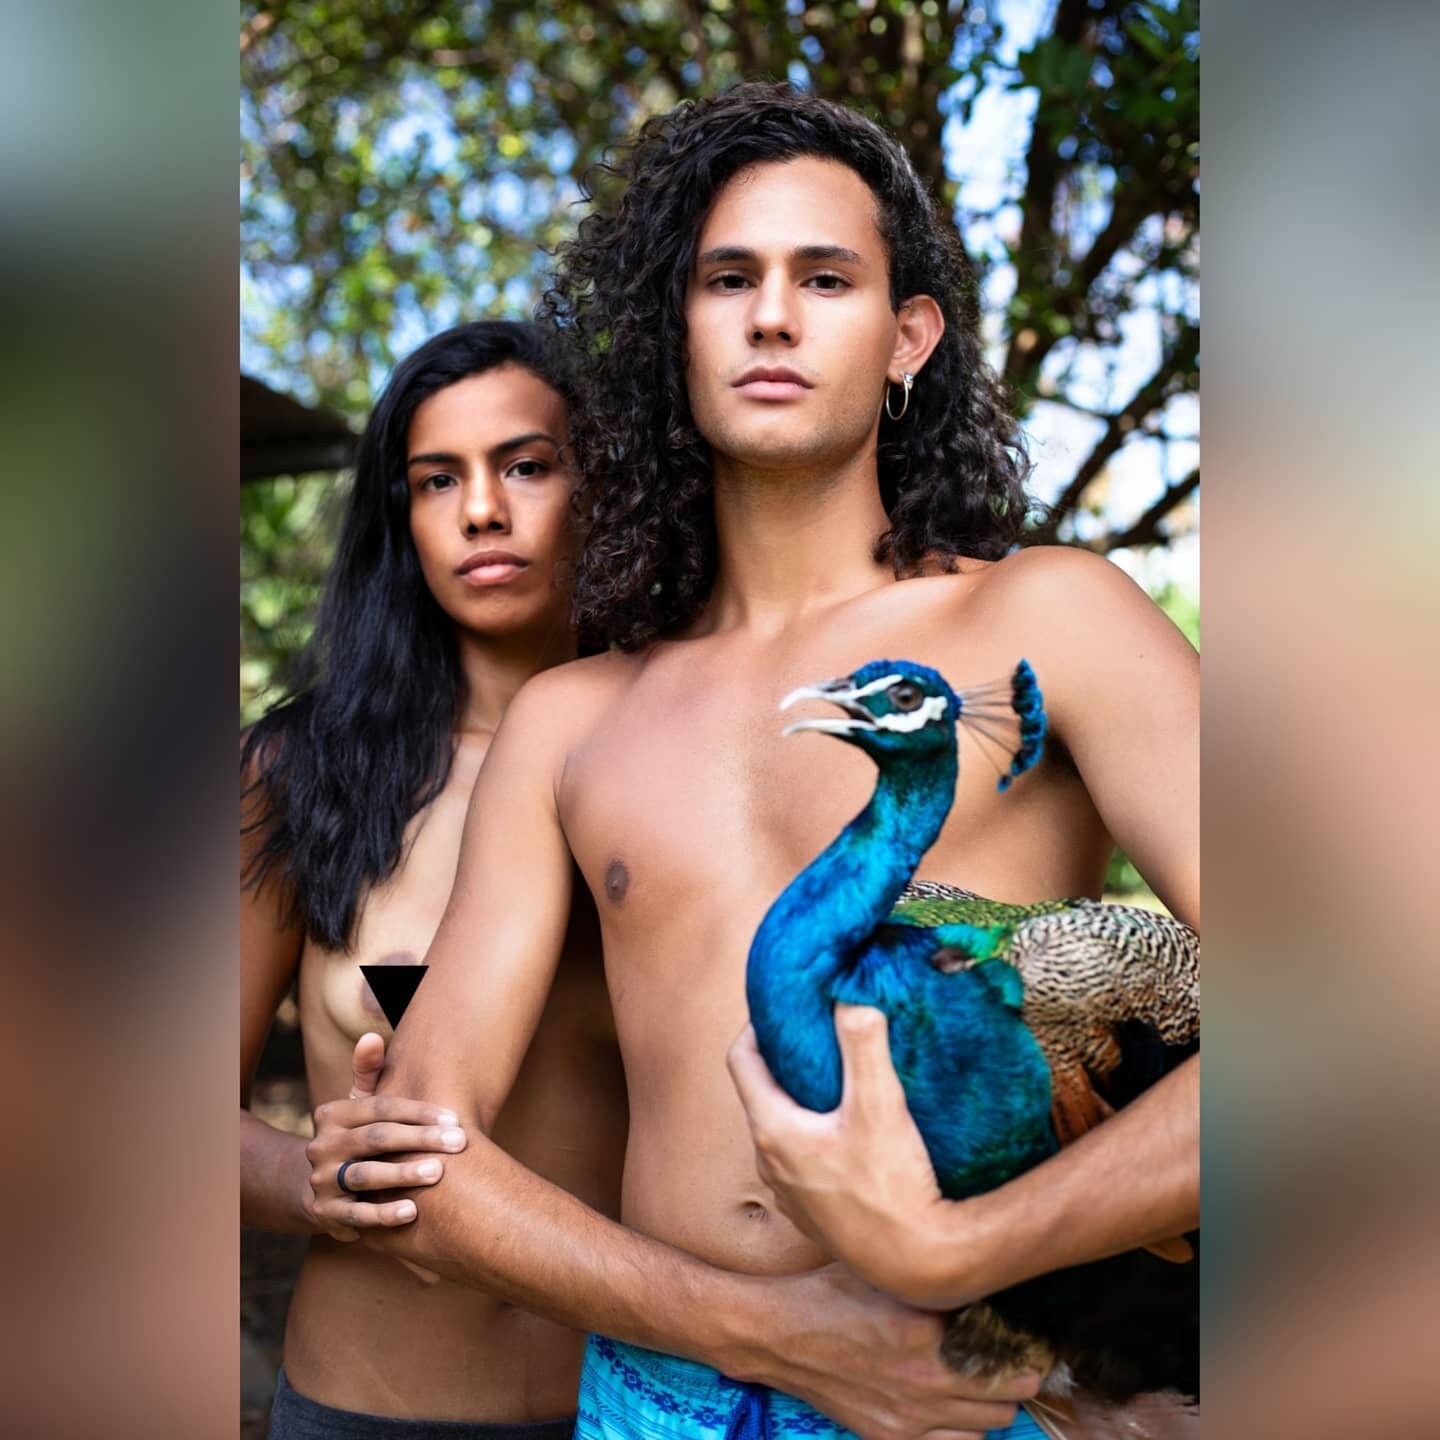 Dago is a gay-identifying man, often portrayed as seductively soft and feminine in my photos. Jannia is a lesbian-identifying woman, often portrayed as androgynously dominant in my photos. However, together their roles reversed. -I'm always in awe of